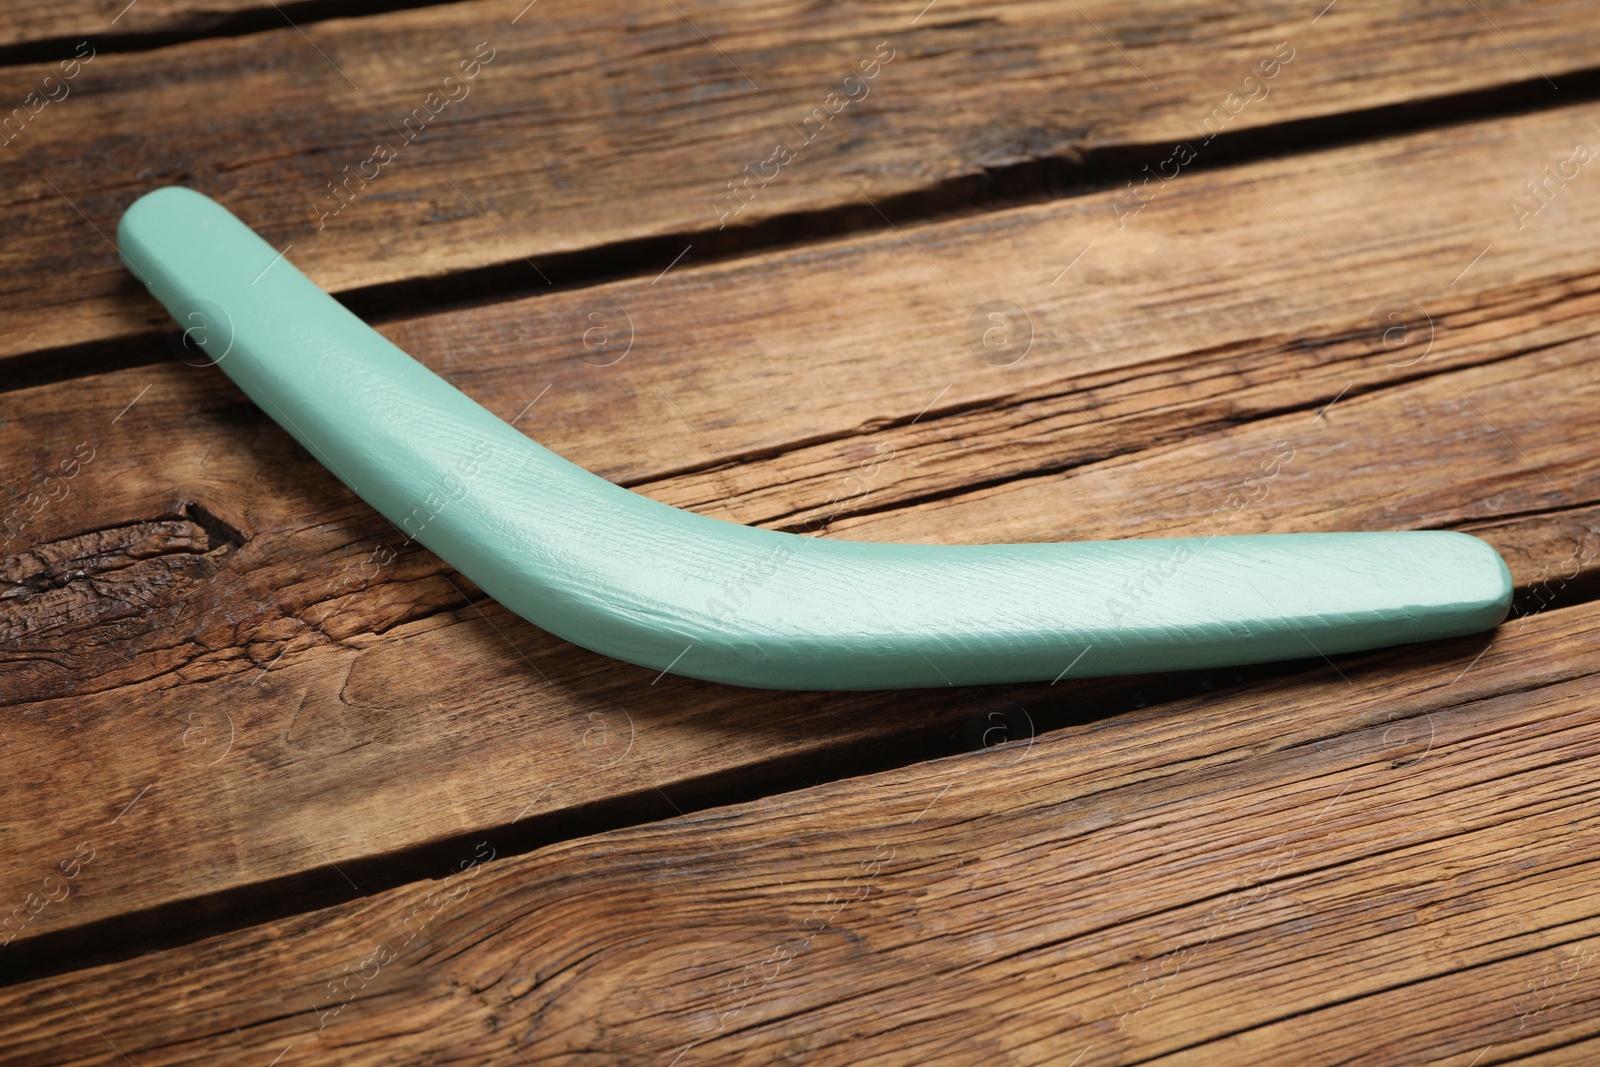 Photo of Turquoise boomerang on wooden background. Outdoors activity